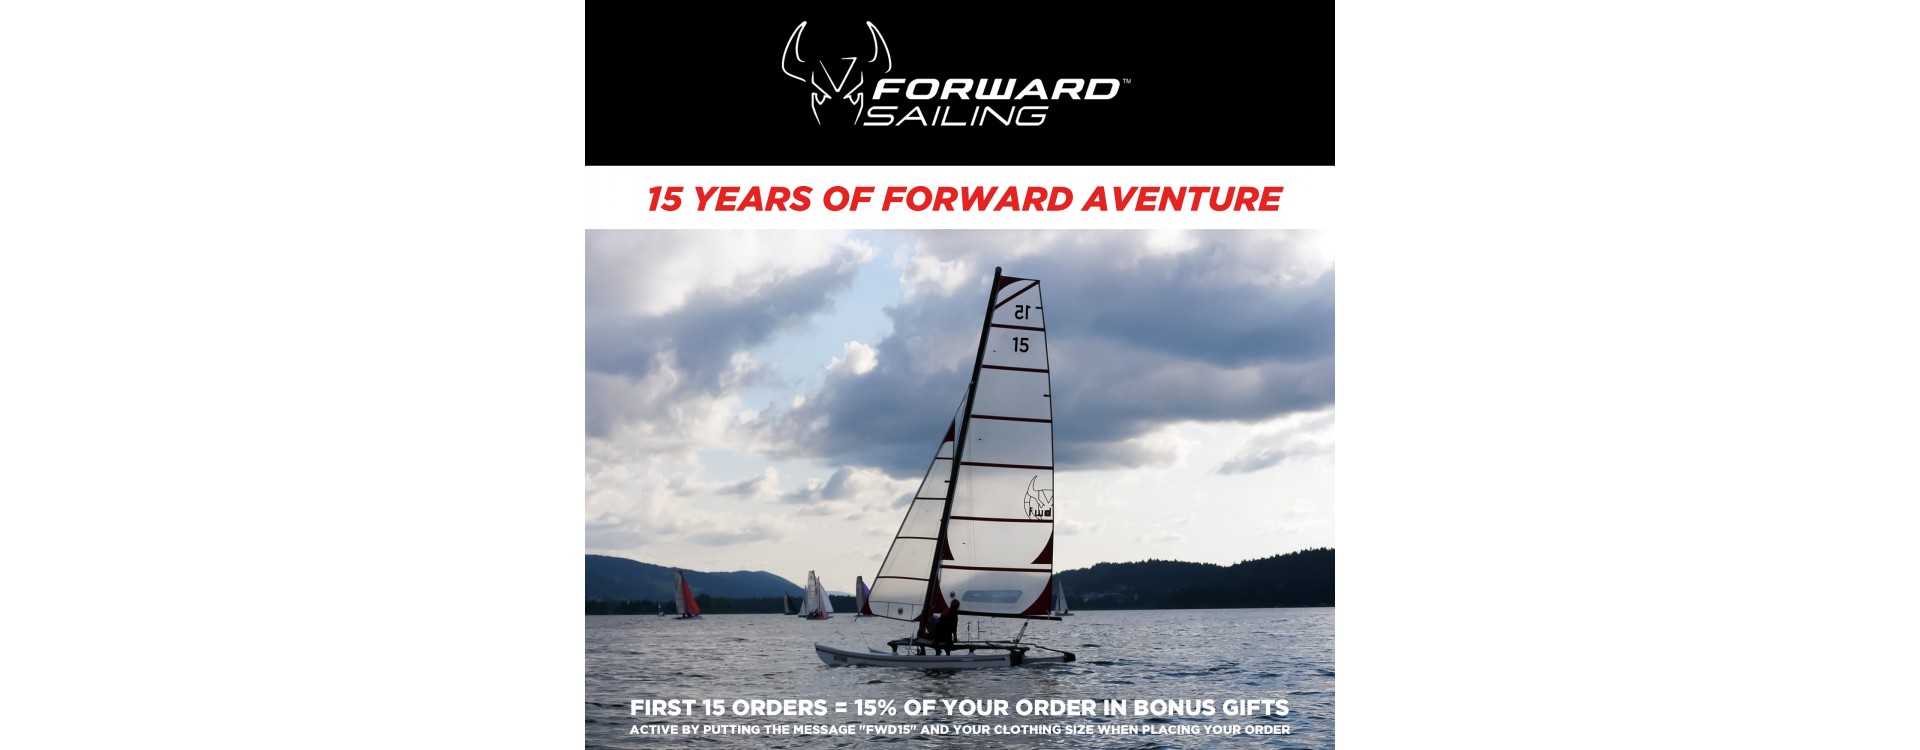 Forward Sailing's 15 years special offer